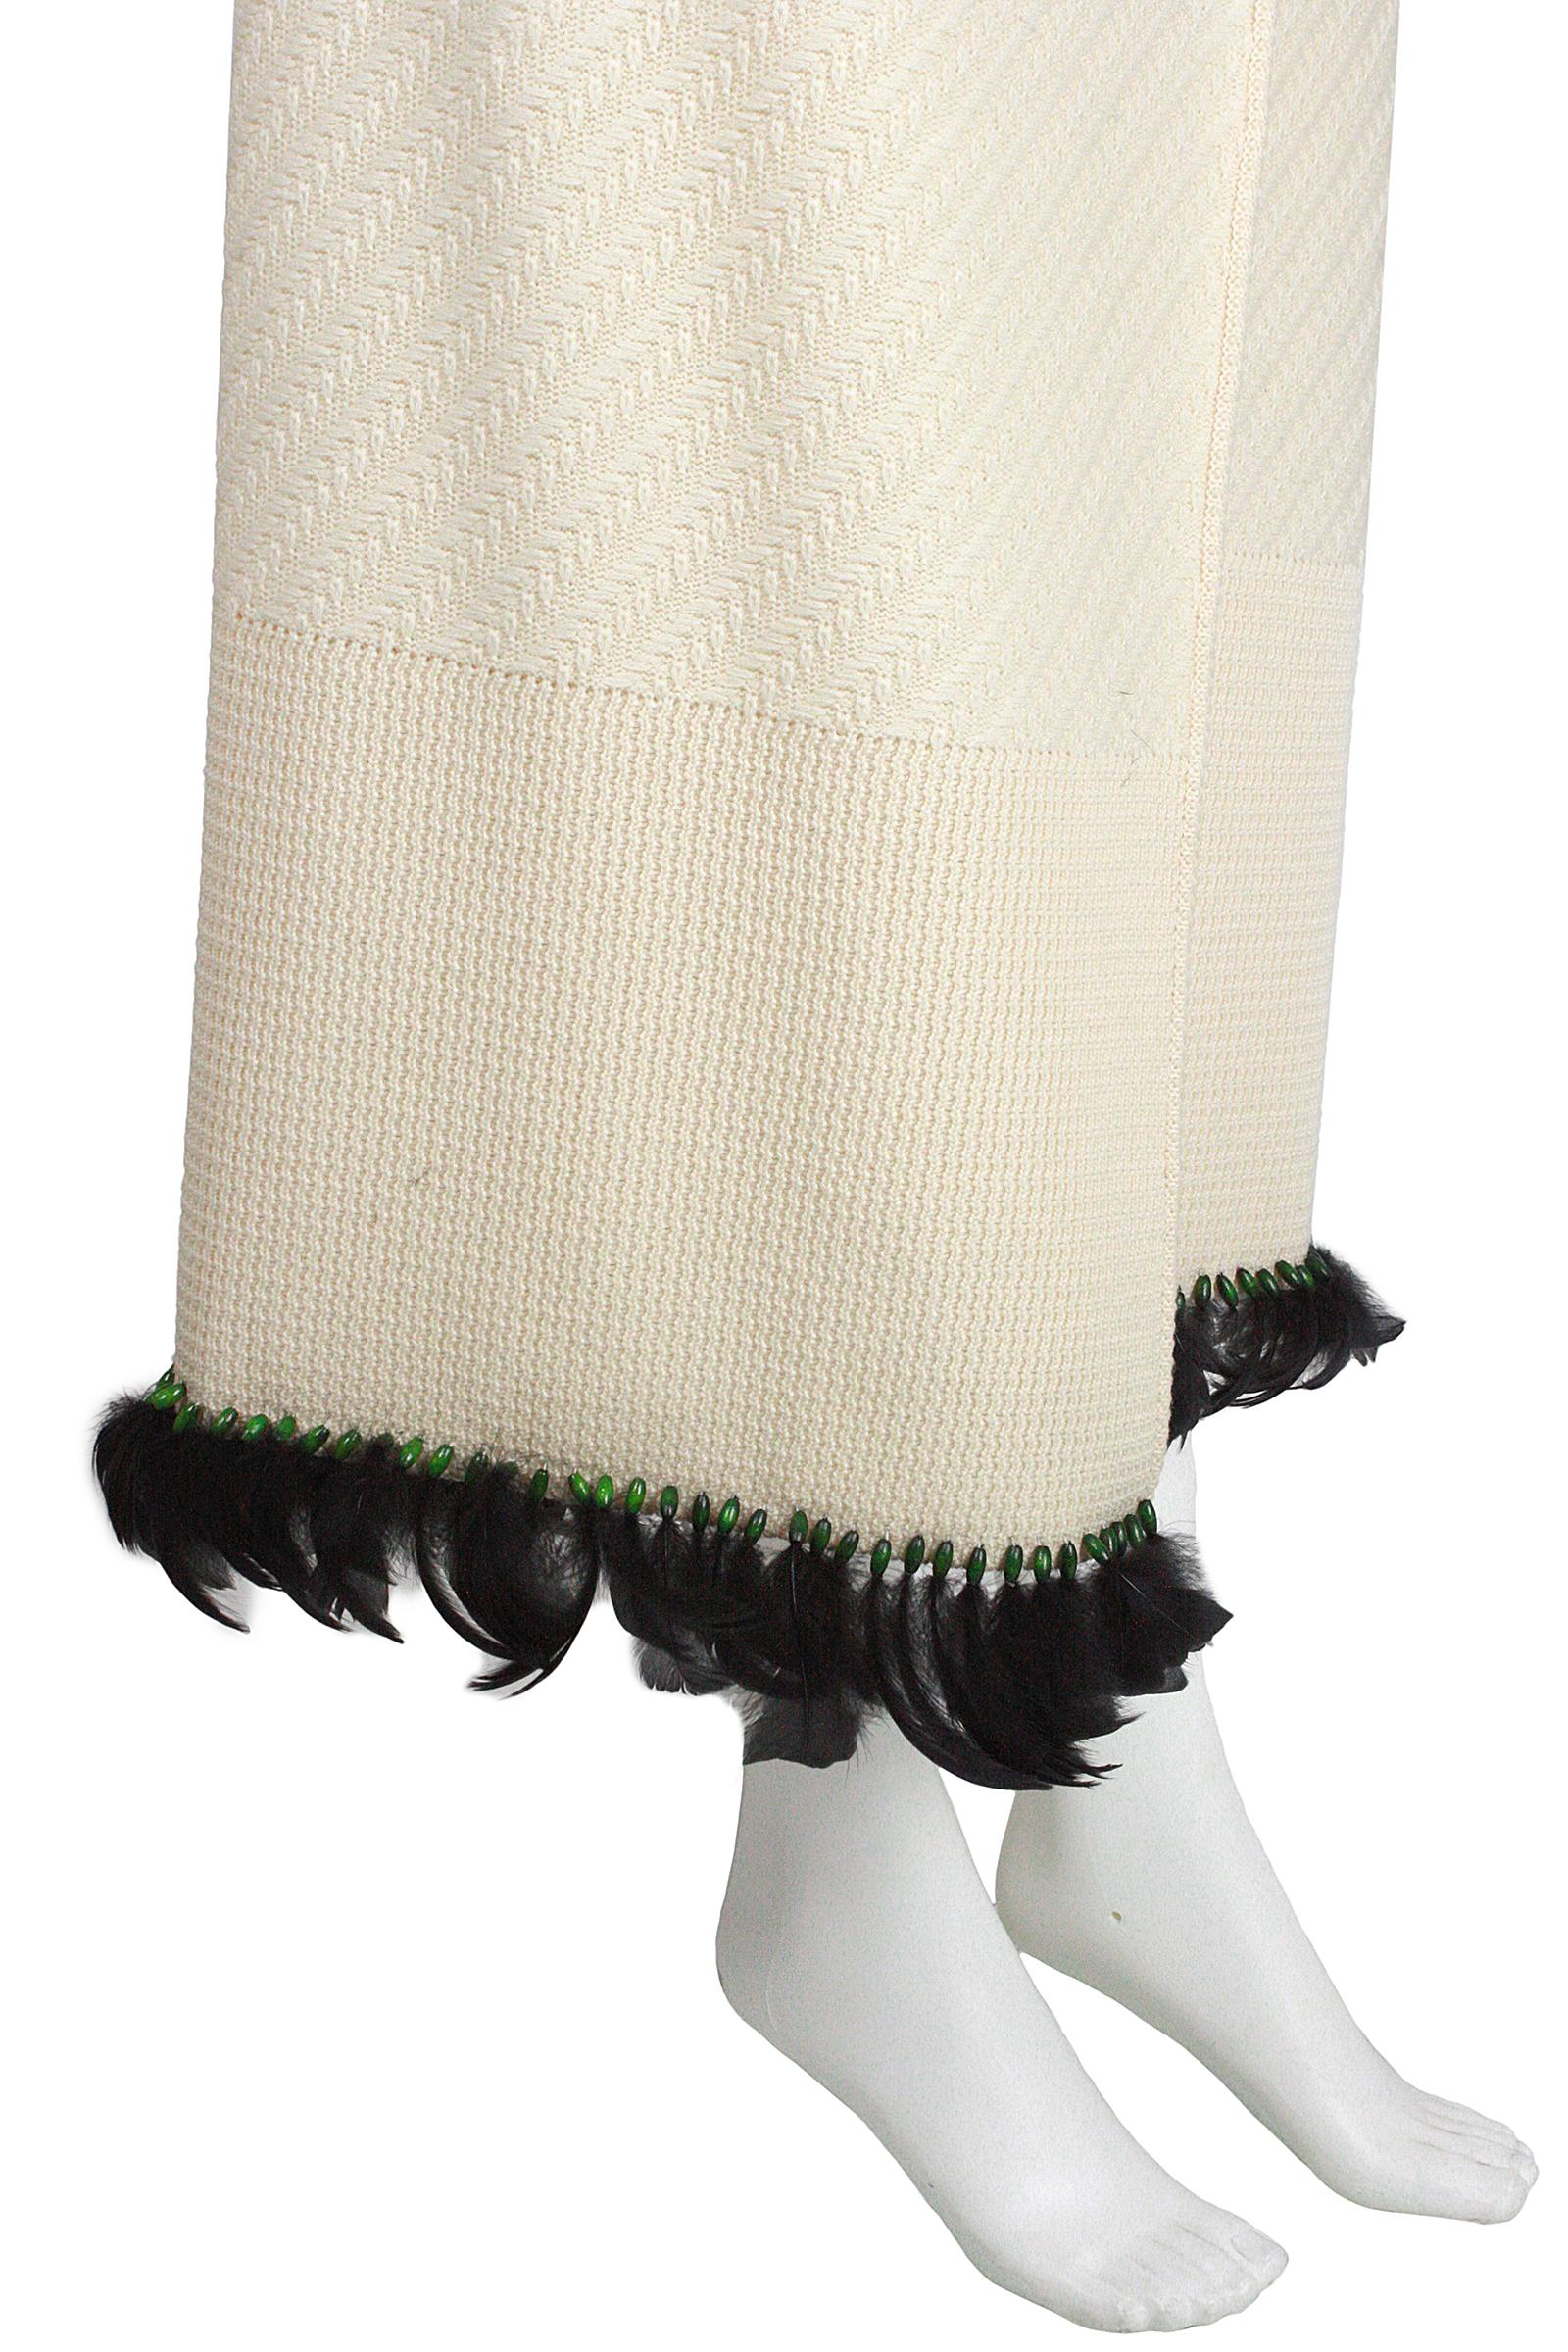 Women's 1990s John Galliano Cream Knit Wrap Skirt with Green Beads and Black Feathers